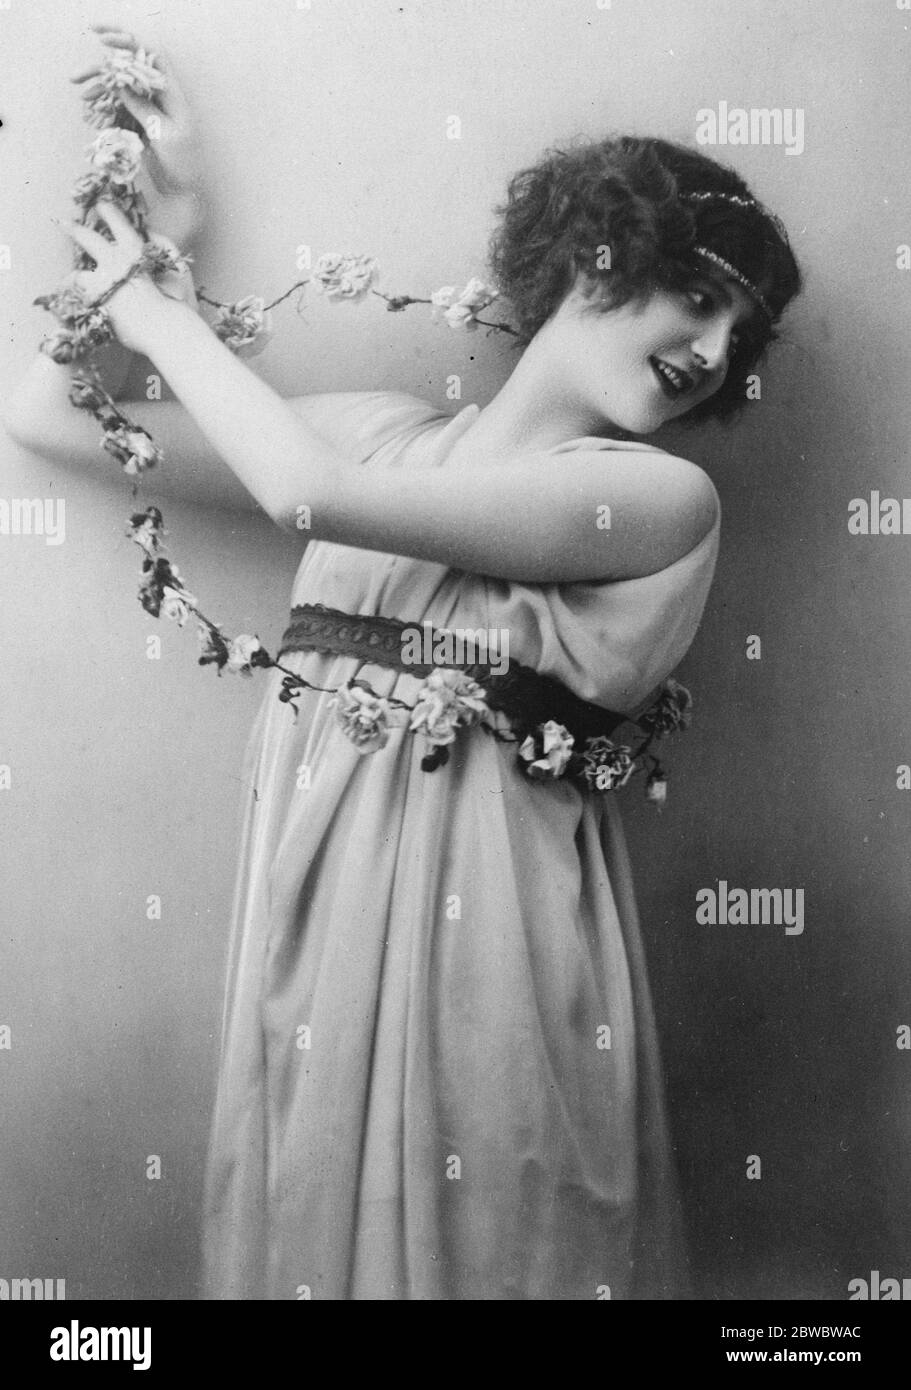 Princess dancer whose father was Mayor of Moscow . Princess Alexandra Galitzino who recieves a small salary for dancing at a Moscow cabaret . Her father Prince Galitzine , was a prominent member of the Monarchist court and at one time Mayor of Moscow . 18 August 1926 Stock Photo